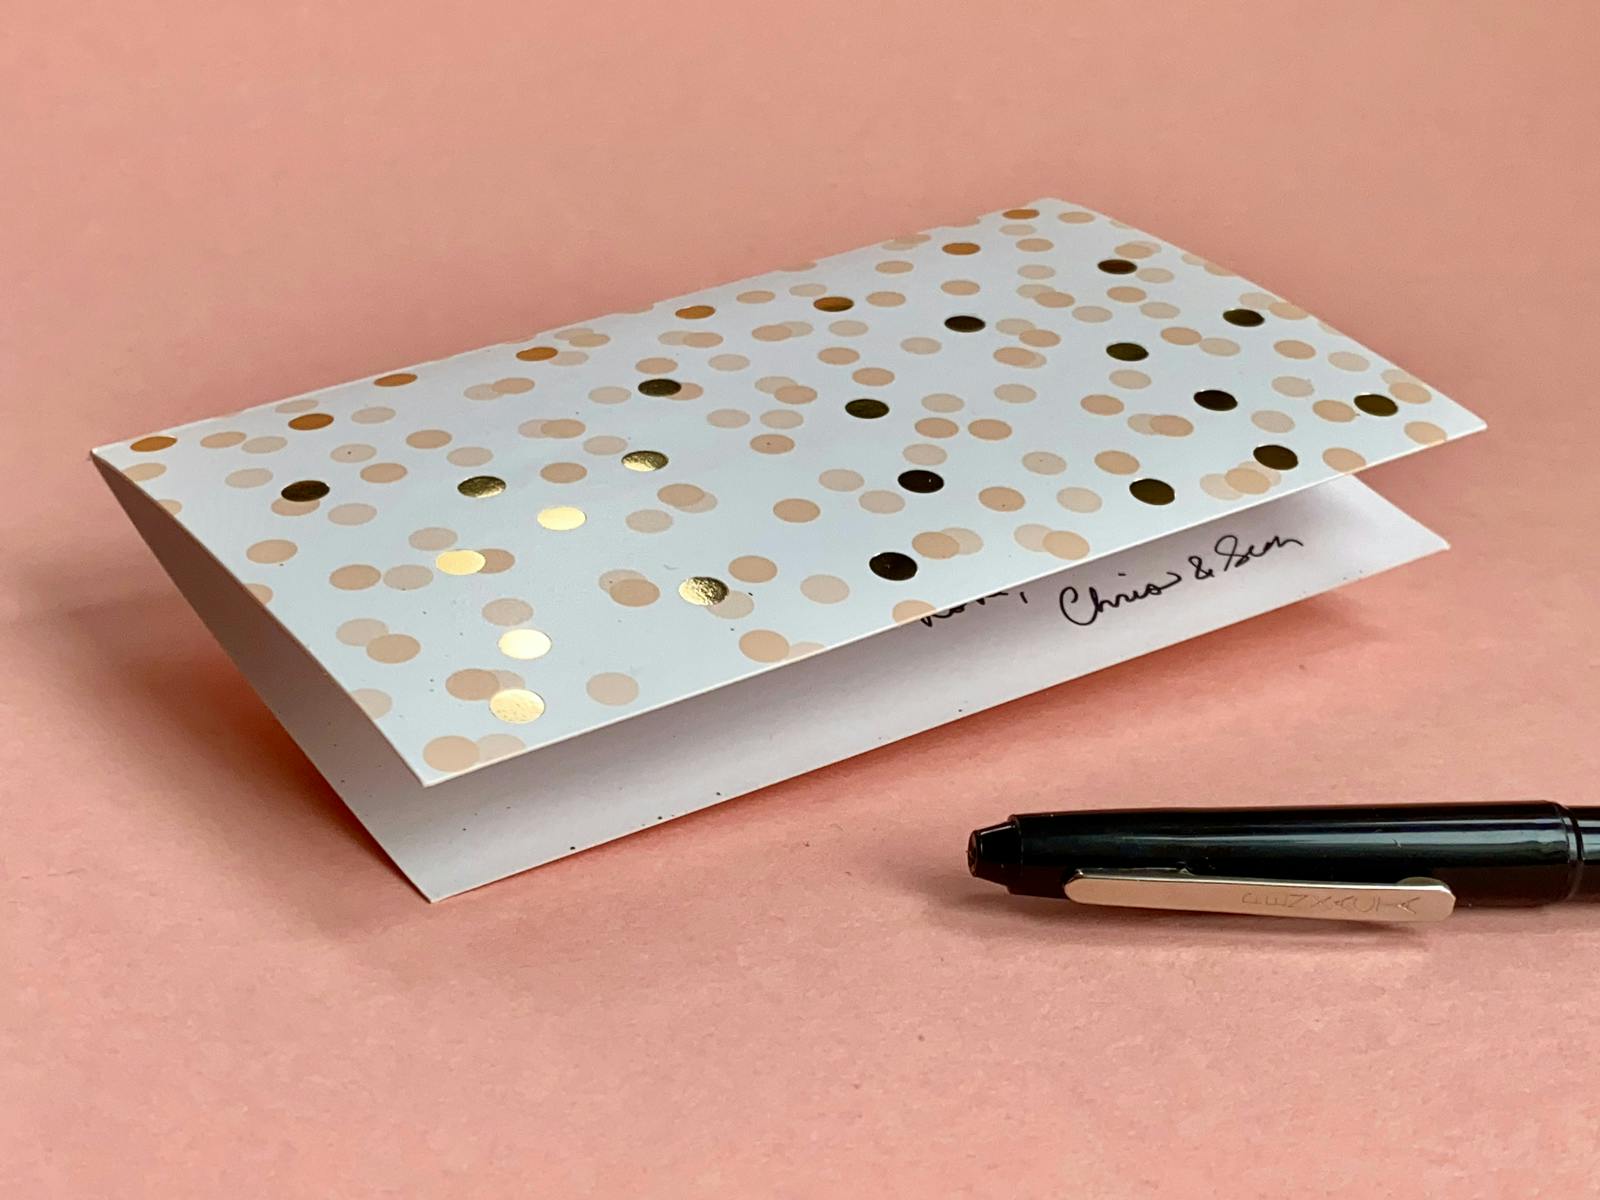 A white birthday card with gold foil dots on a rose pink background. Beside it, a black pen. This is a card our friends sent us that we’ve saved because it was thoughtfully written.